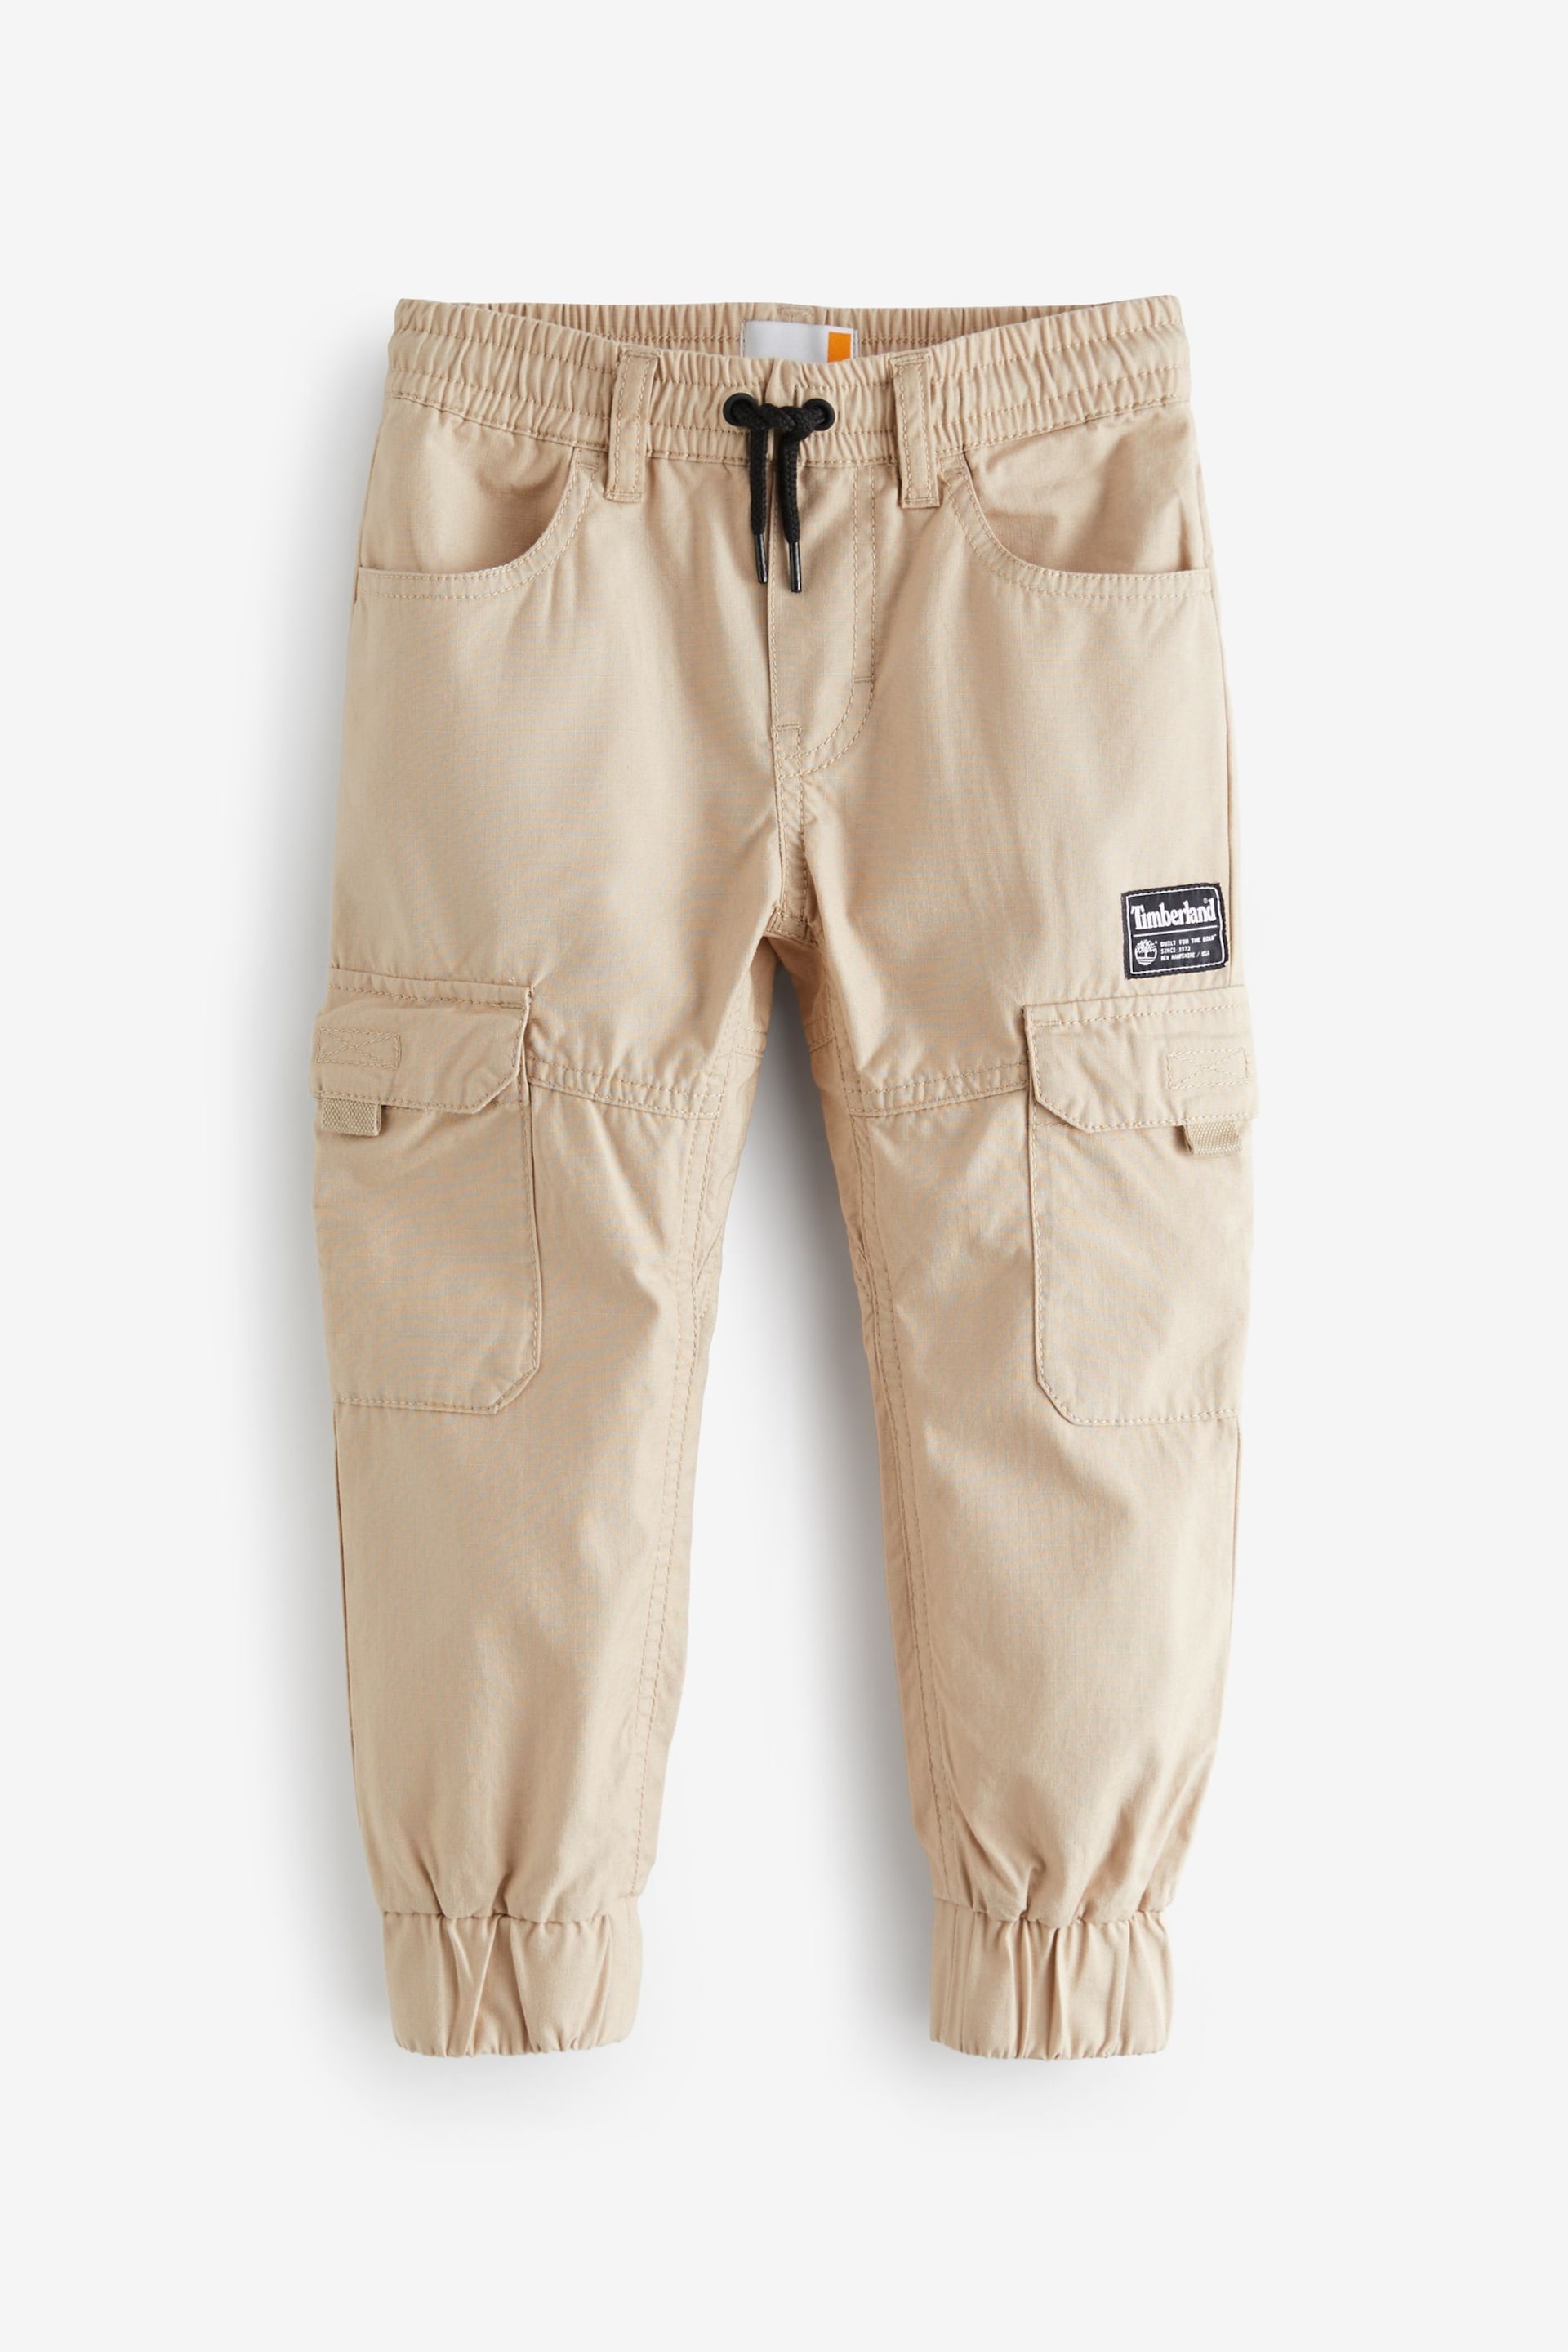 Timberland Natural Utility Cargo Trousers With Pockets - Image 2 of 2